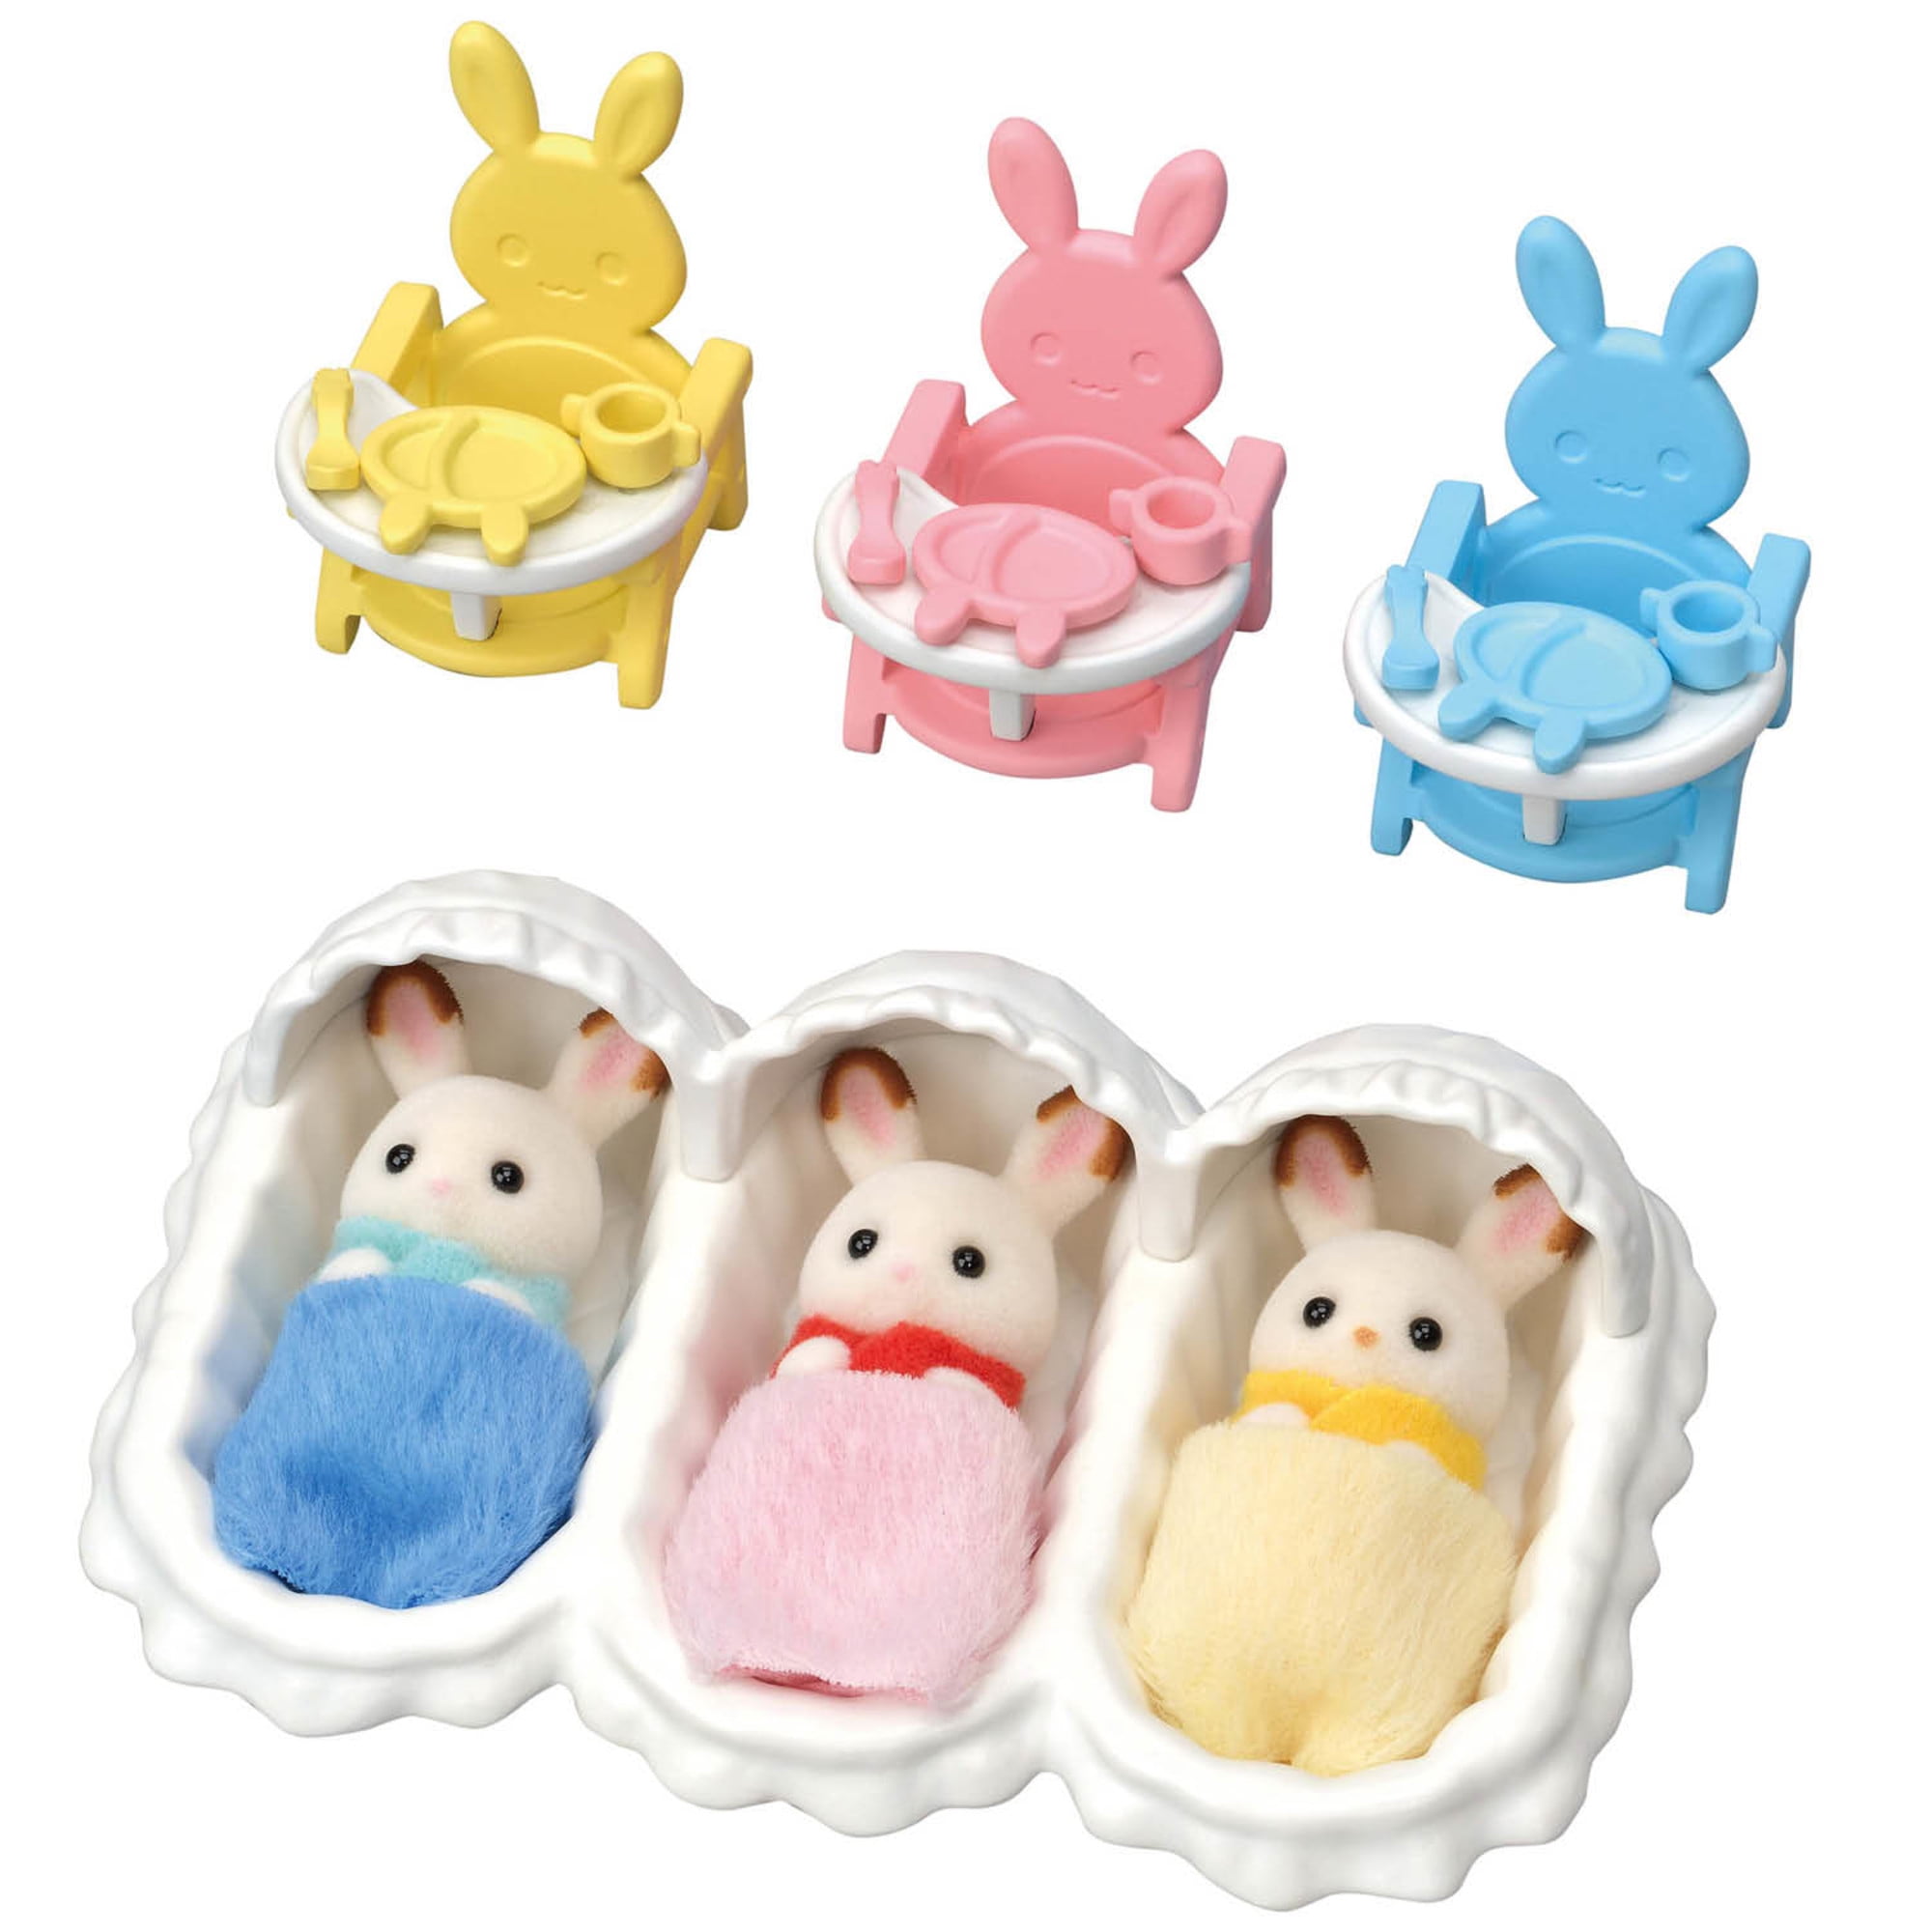 Sylvanian Families Newspaper Spares Accessories Calico Critters 